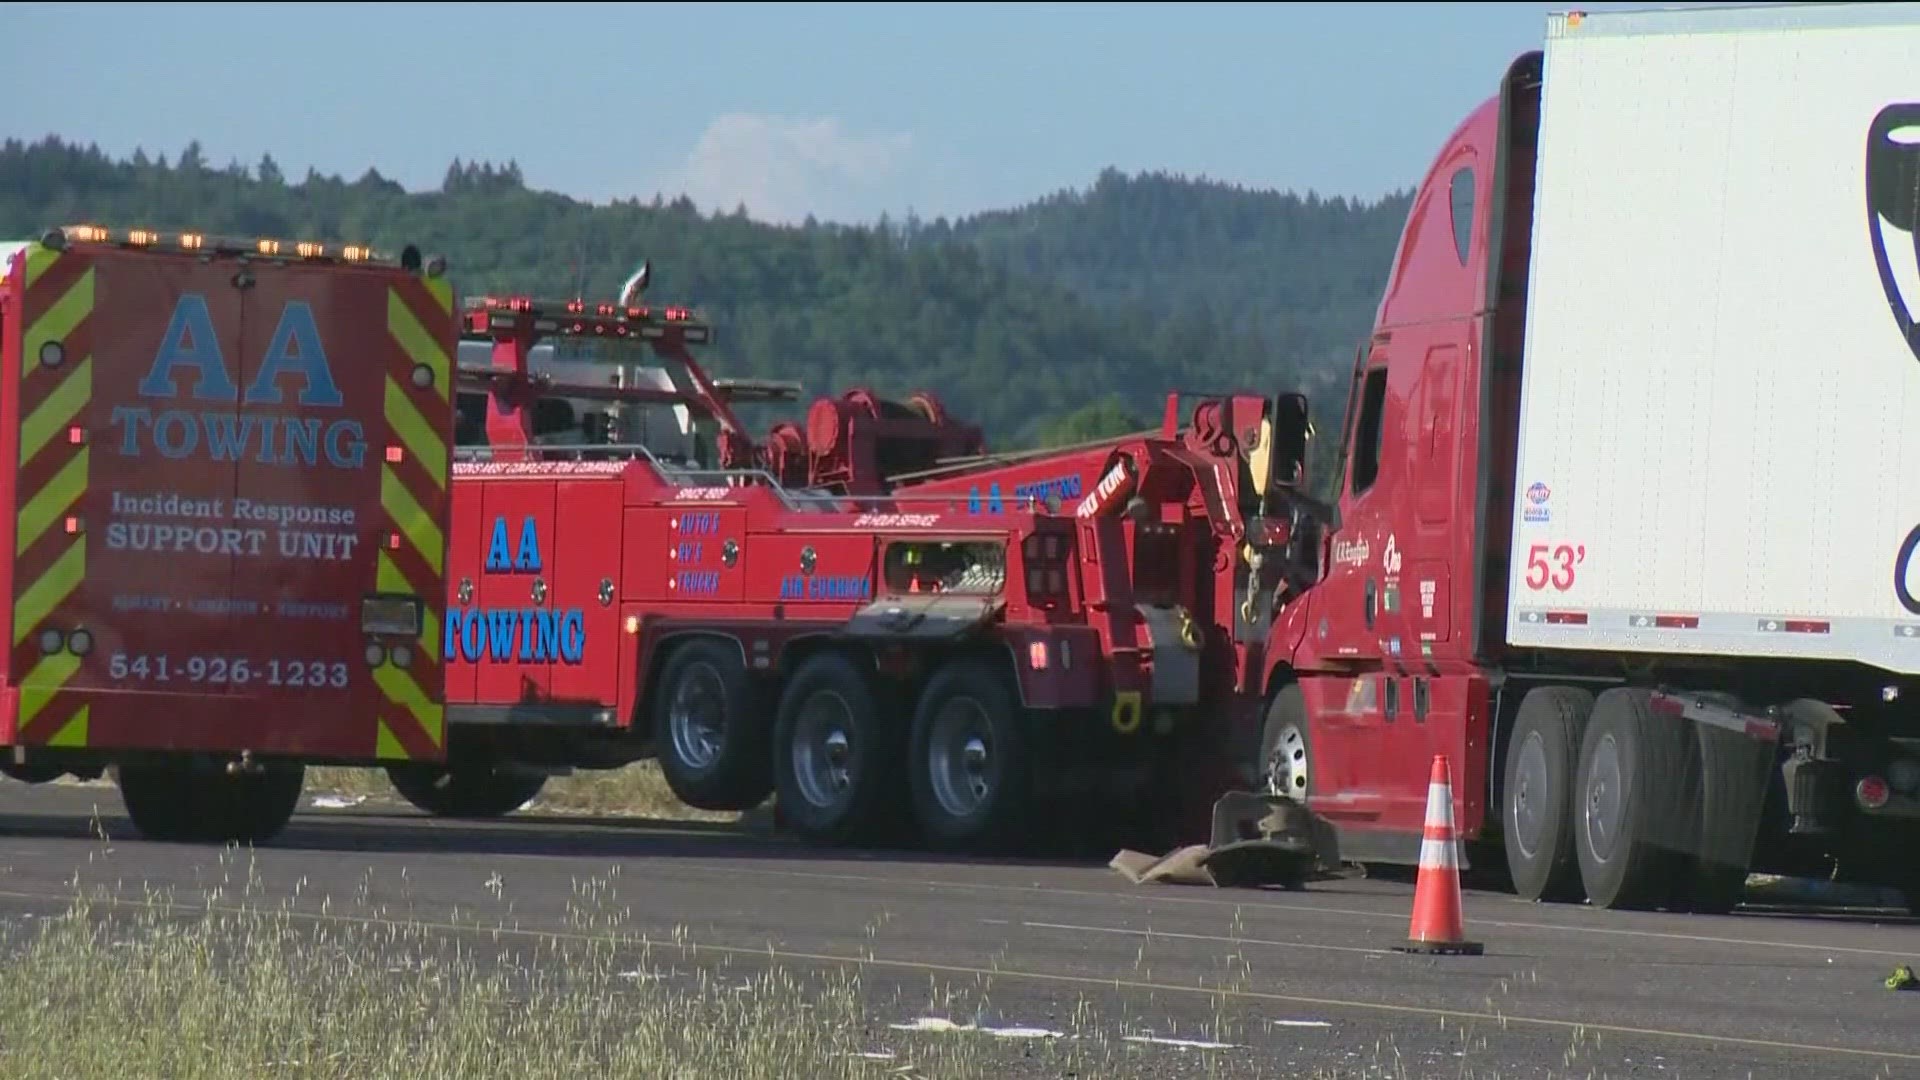 OSP says they have arrested the driver of a semi truck on suspicion of manslaughter and a DUI.